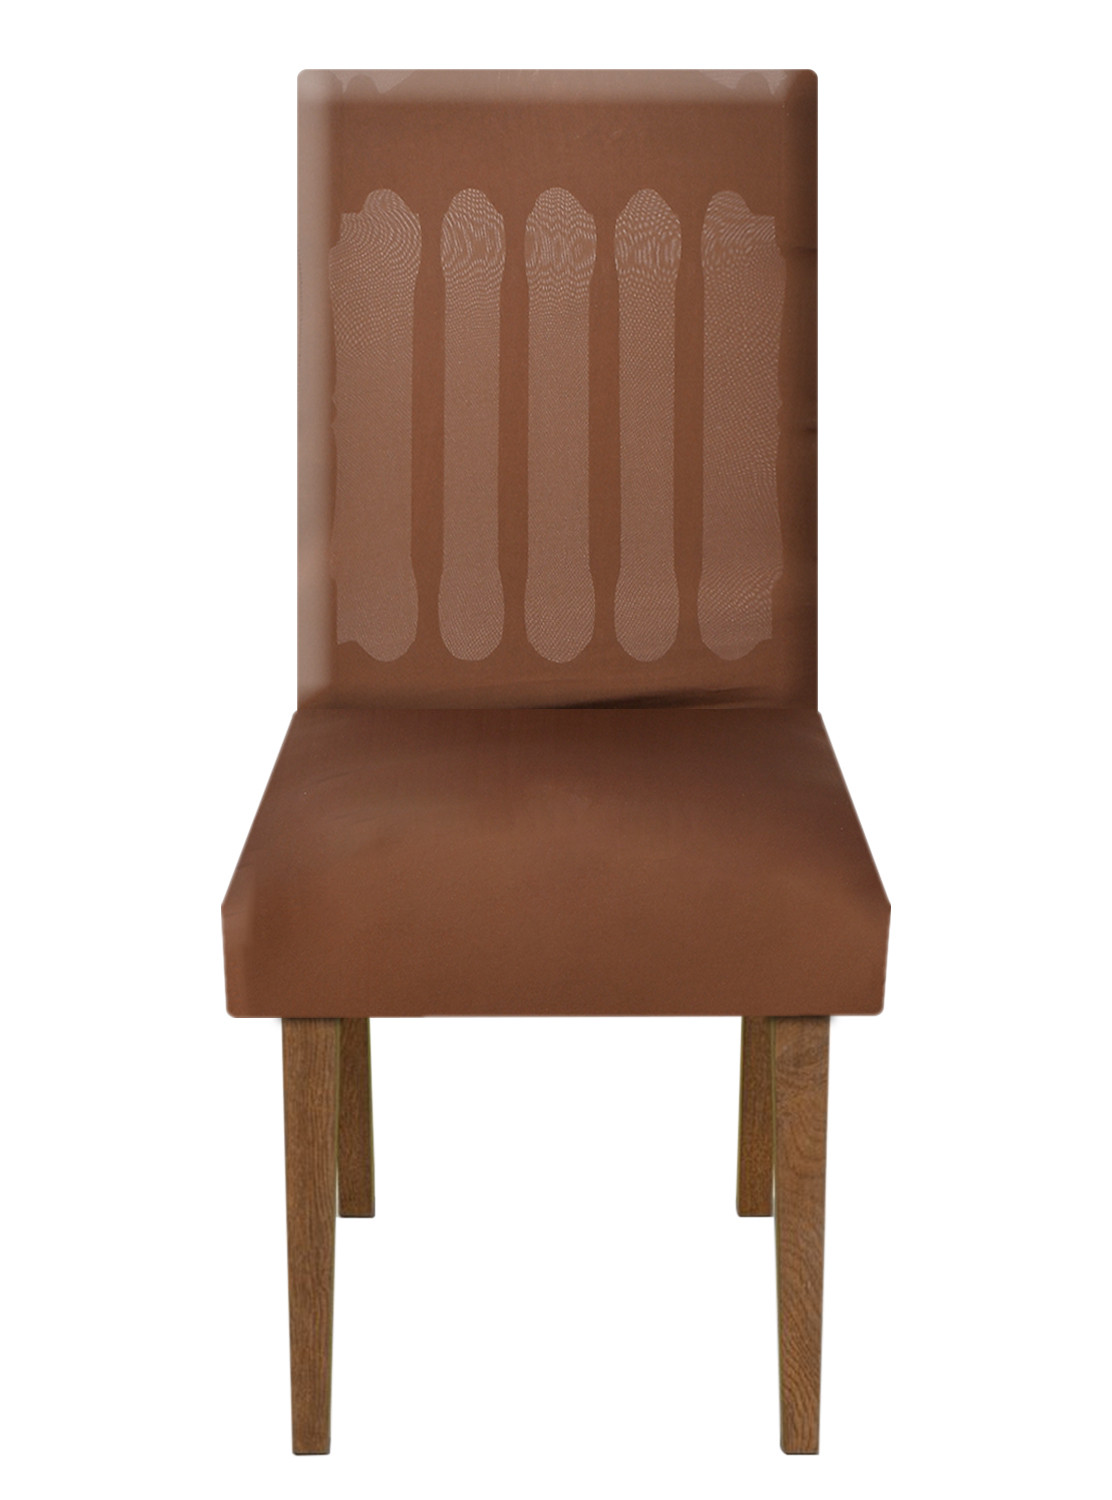 Kuber Industries Elastic Stretchable Polyster Chair Cover For Home, Office, Hotels, Wedding Banquet (Brown)